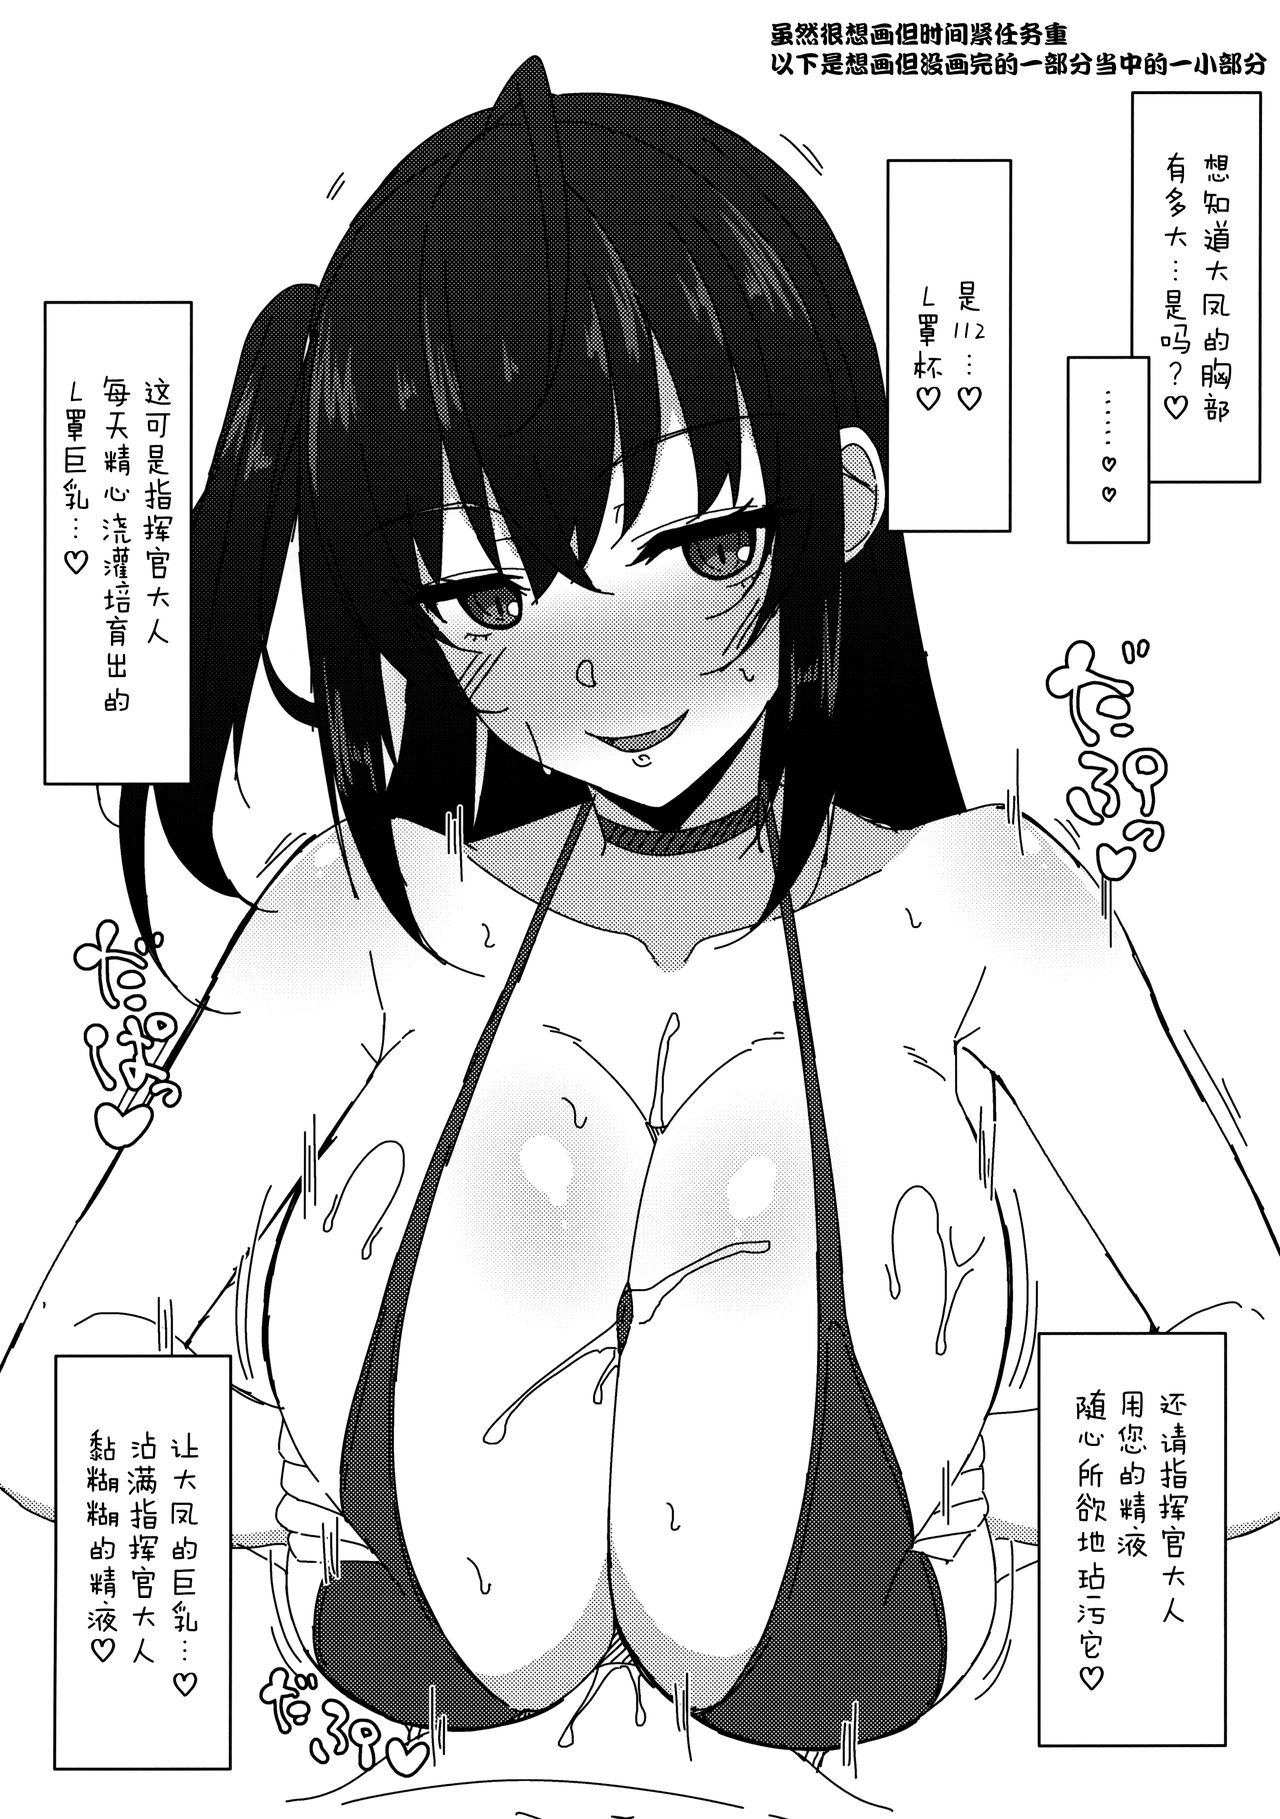 (COMIC1☆15) [Cow Lipid (Fuurai)] LUCKY DISCHARGE (Azur Lane) [Chinese] [无毒汉化组] page 13 full